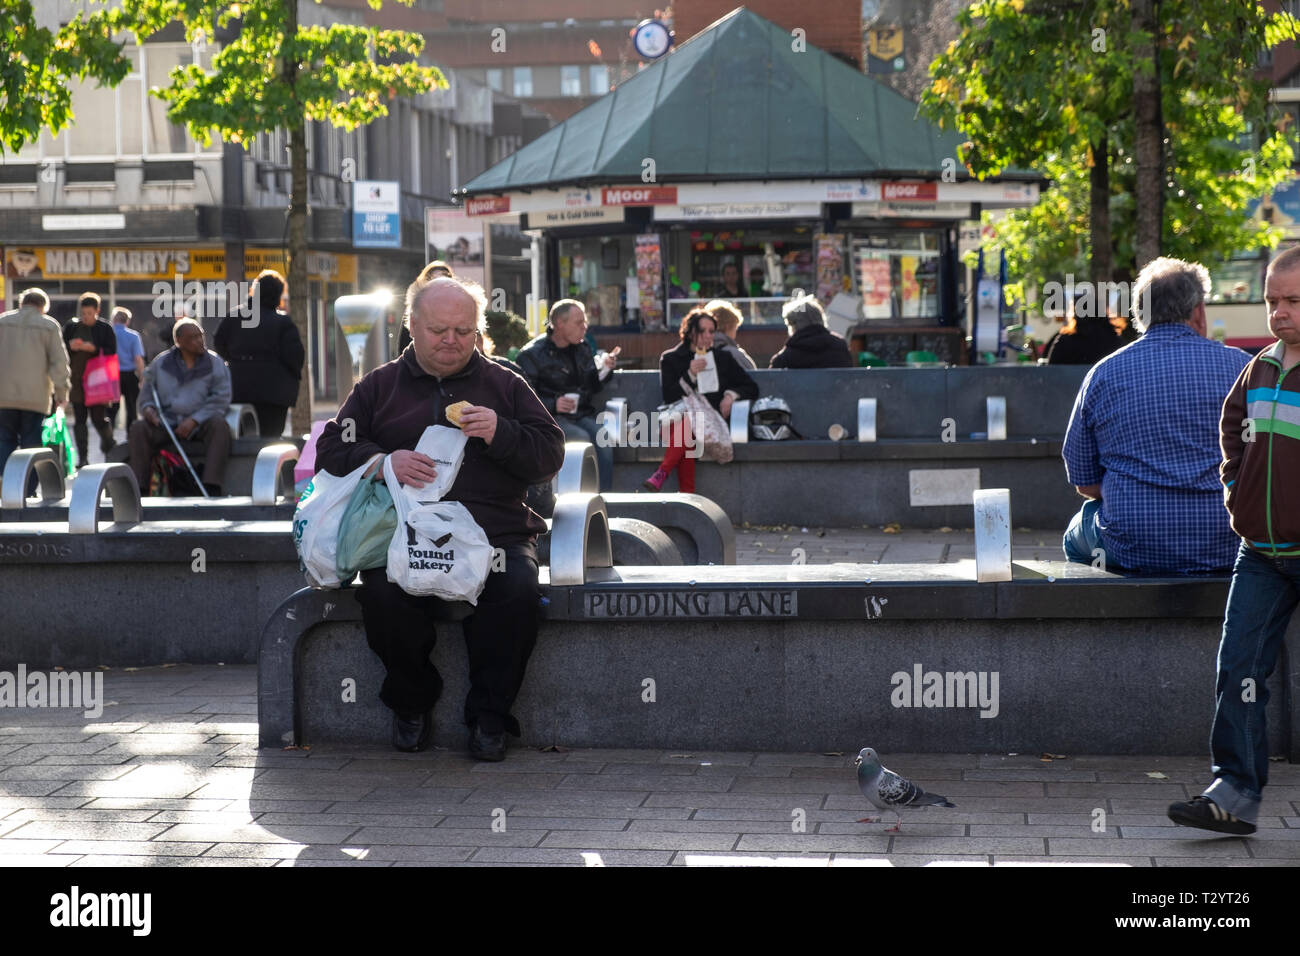 Older man sitting on a concrete bench eating a pie in an urban pedestrican precinct Stock Photo